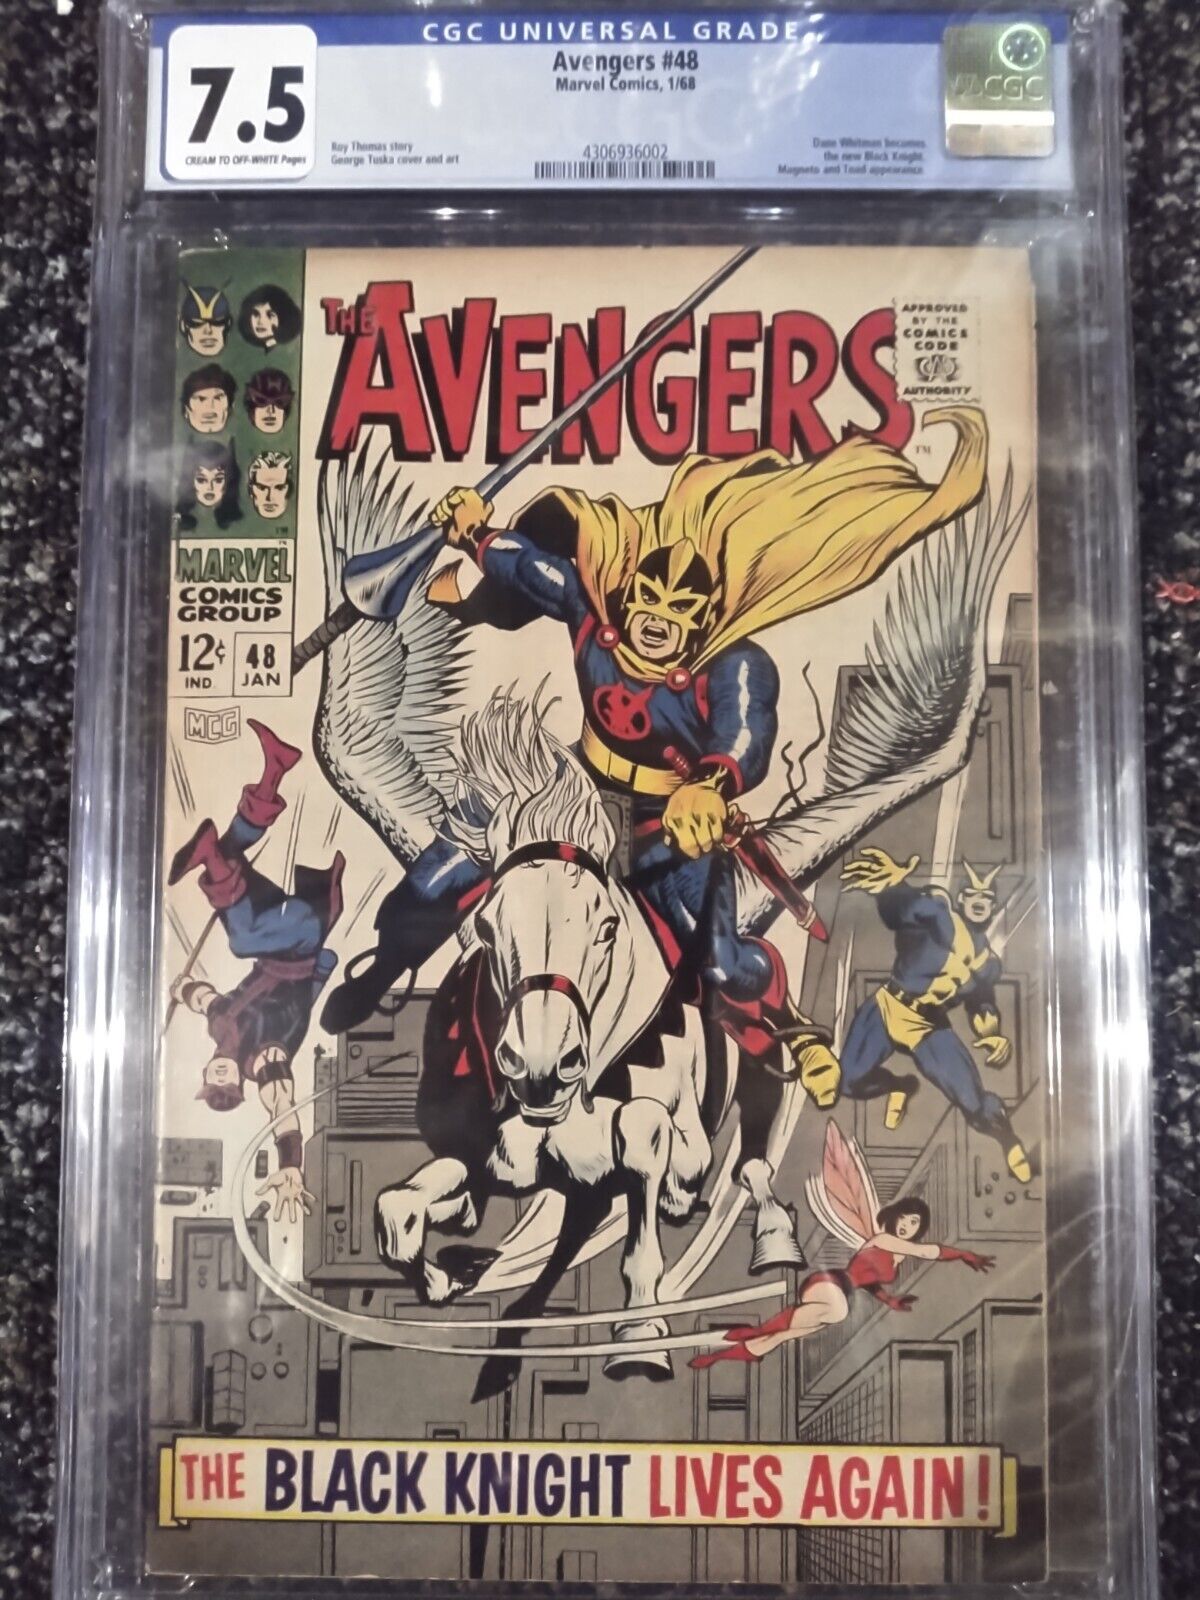 AVENGERS #48 CGC 7.5 DANE WHITMAN BECOMES THE NEW BLACK KNIGHT -Free Shipping-